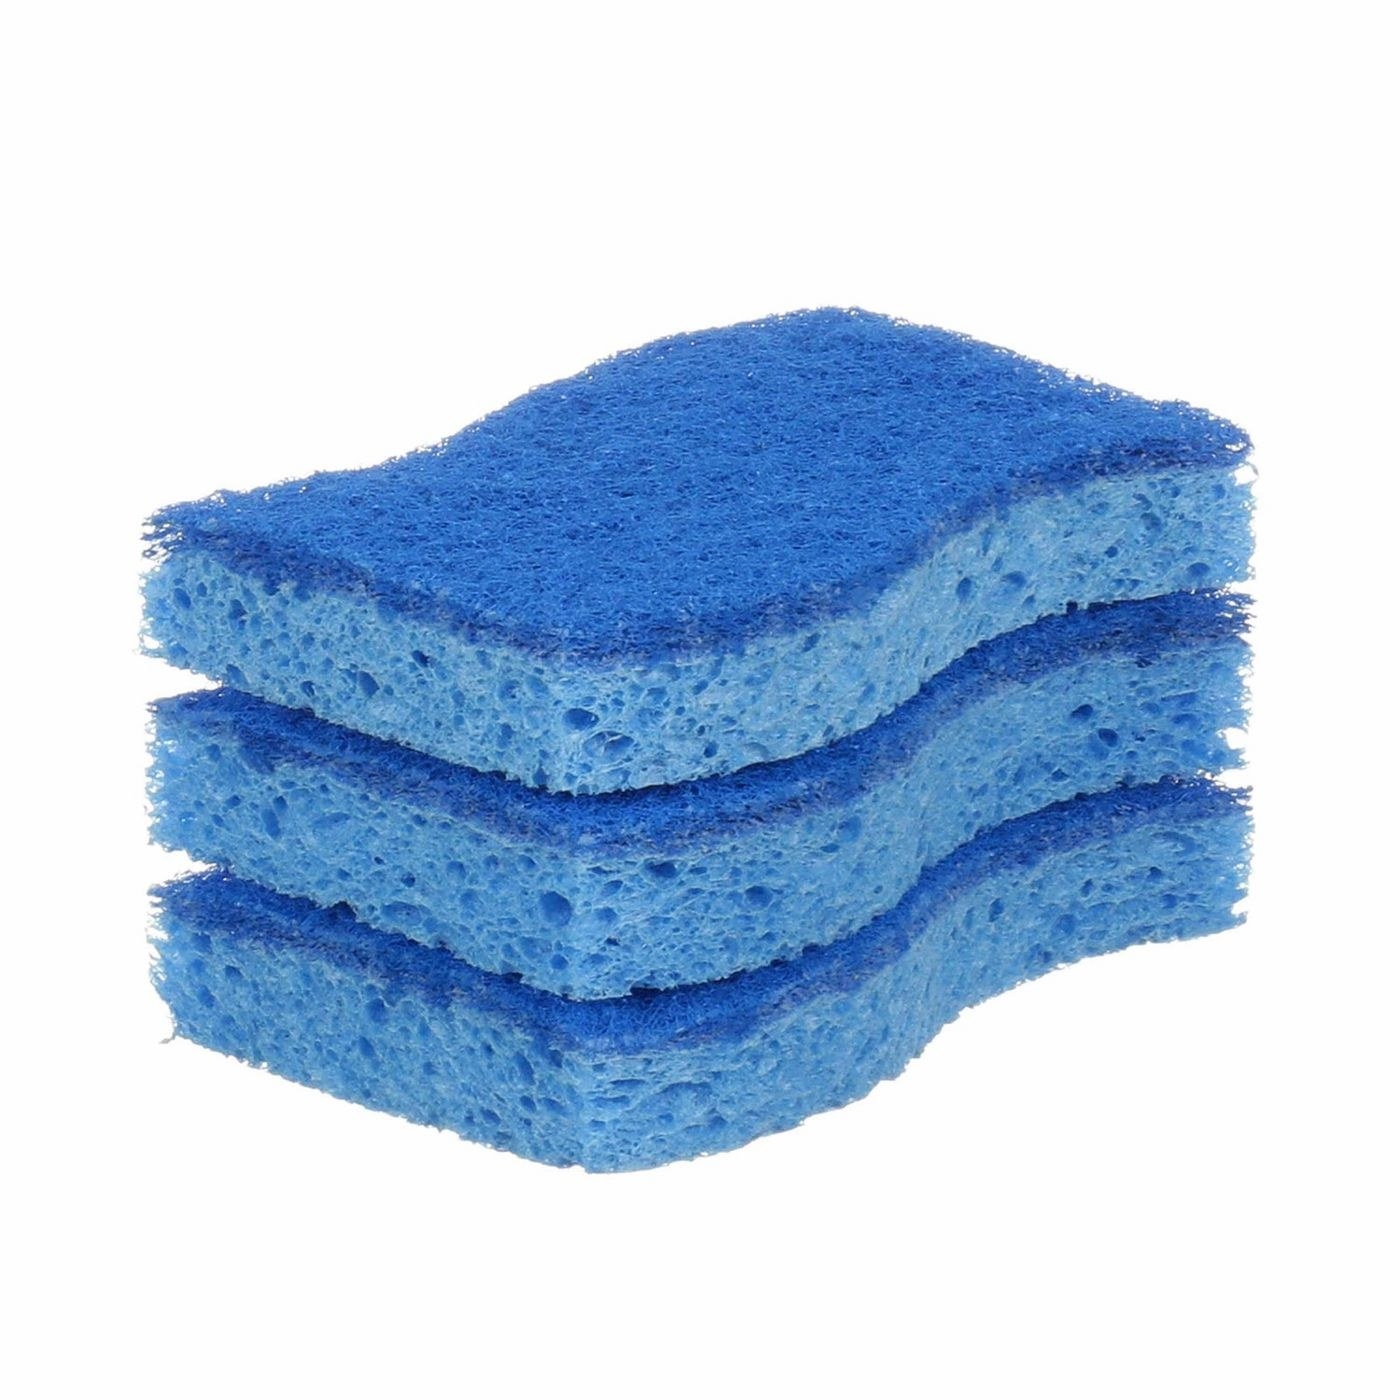 Three blue sponges stacked up